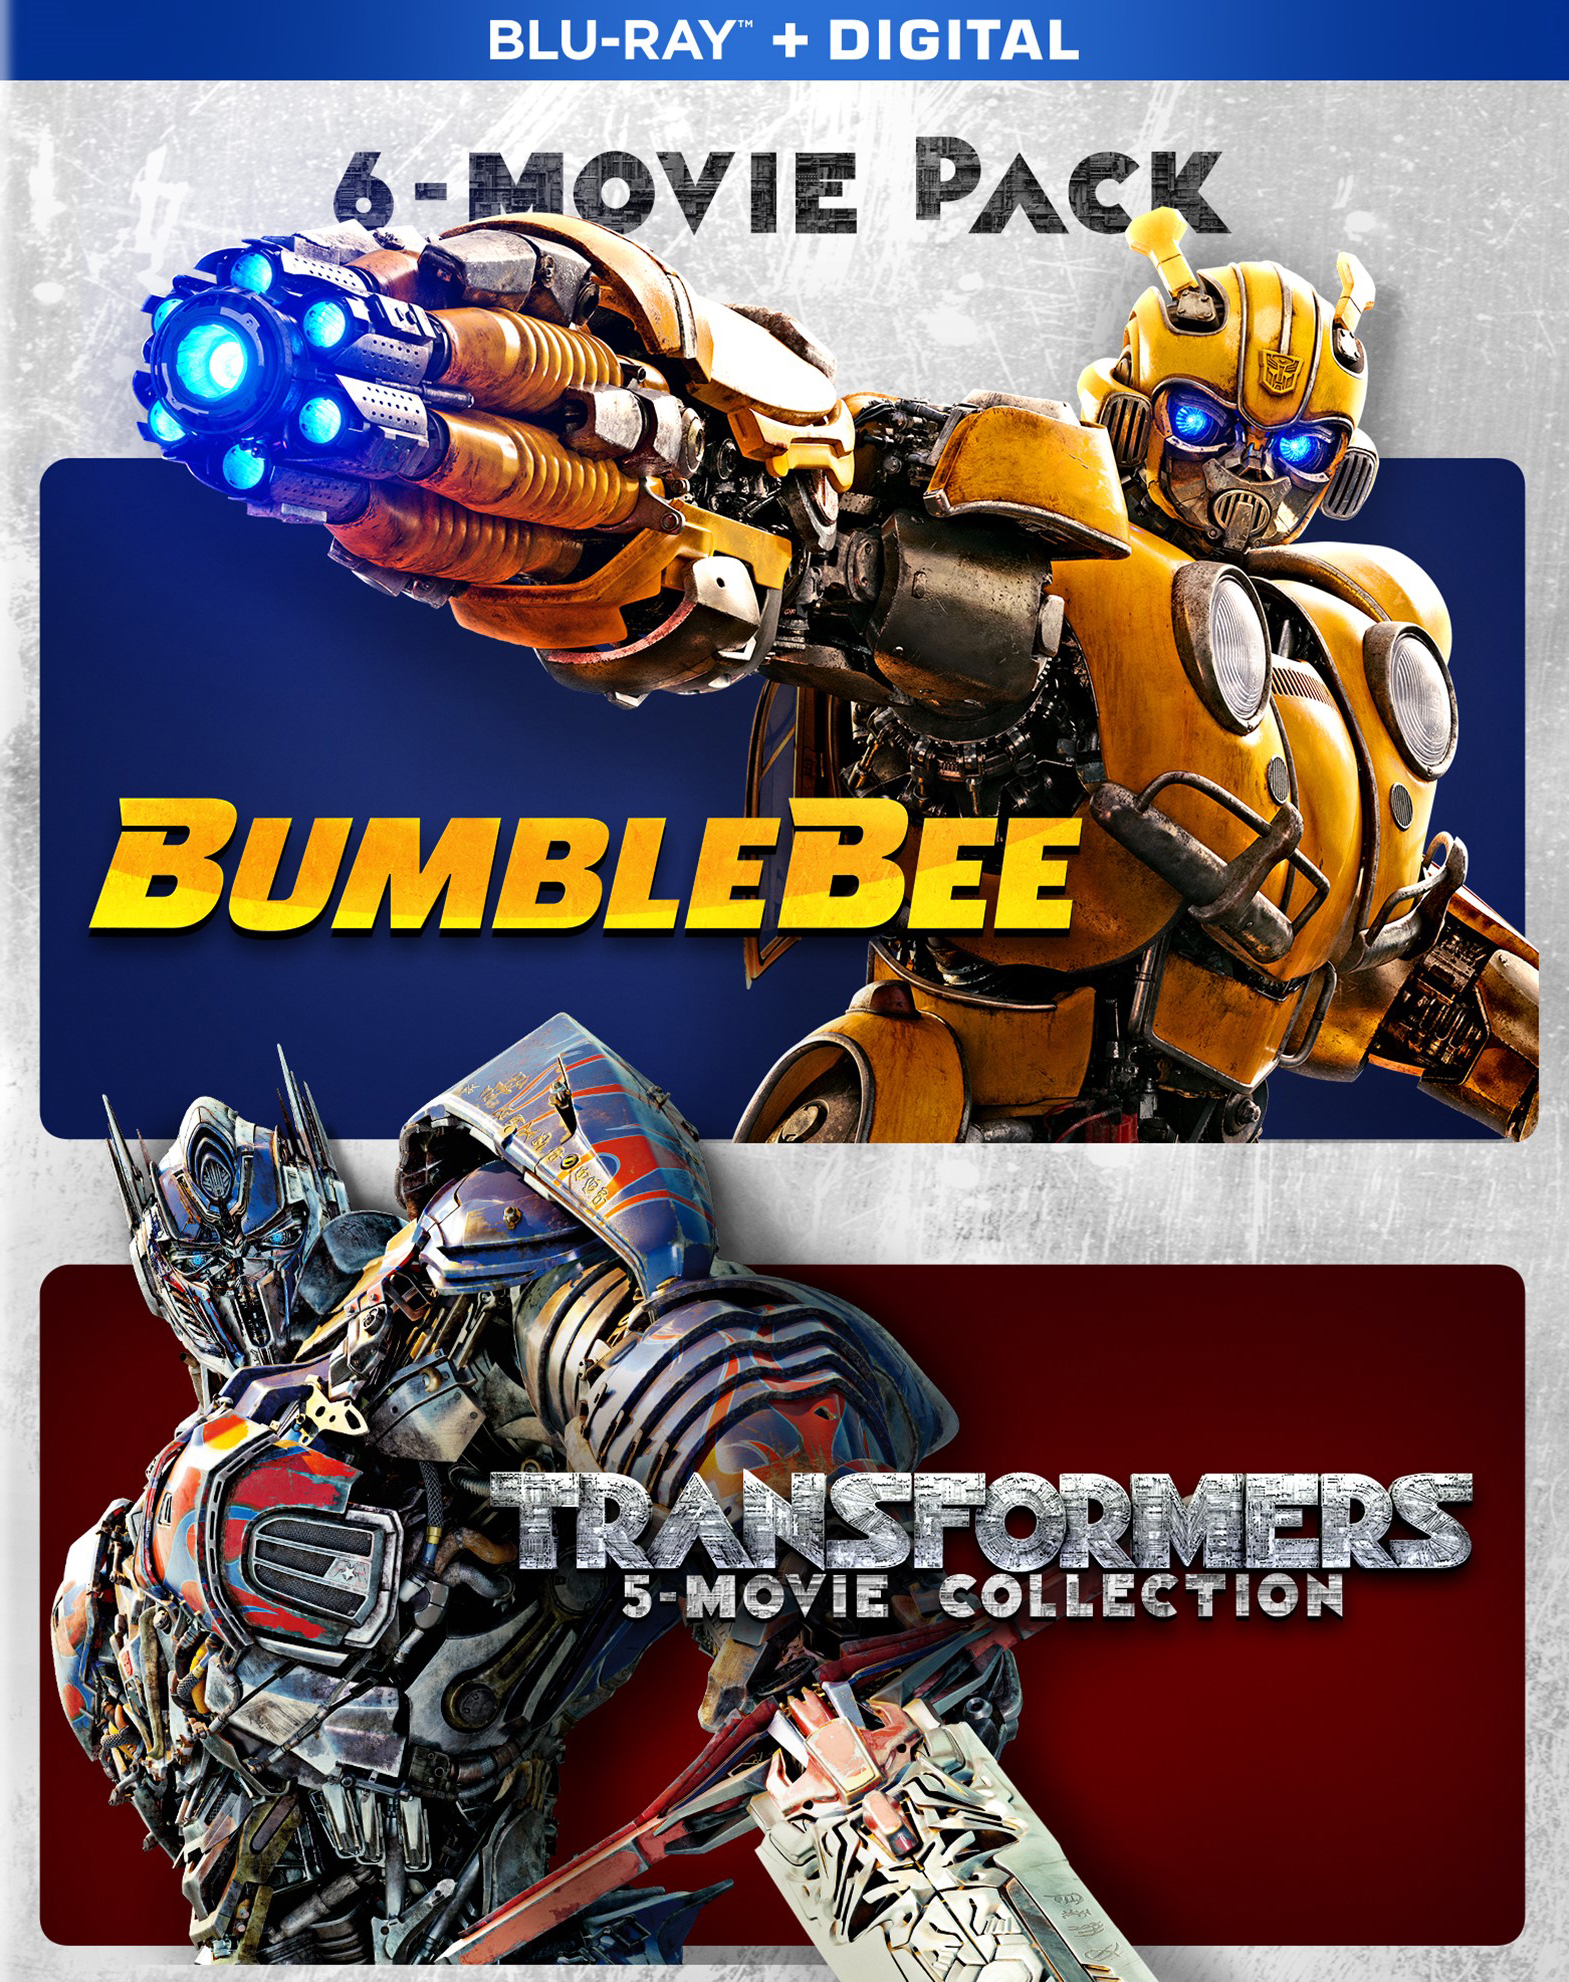 Best Buy: Bumblebee and Transformers 